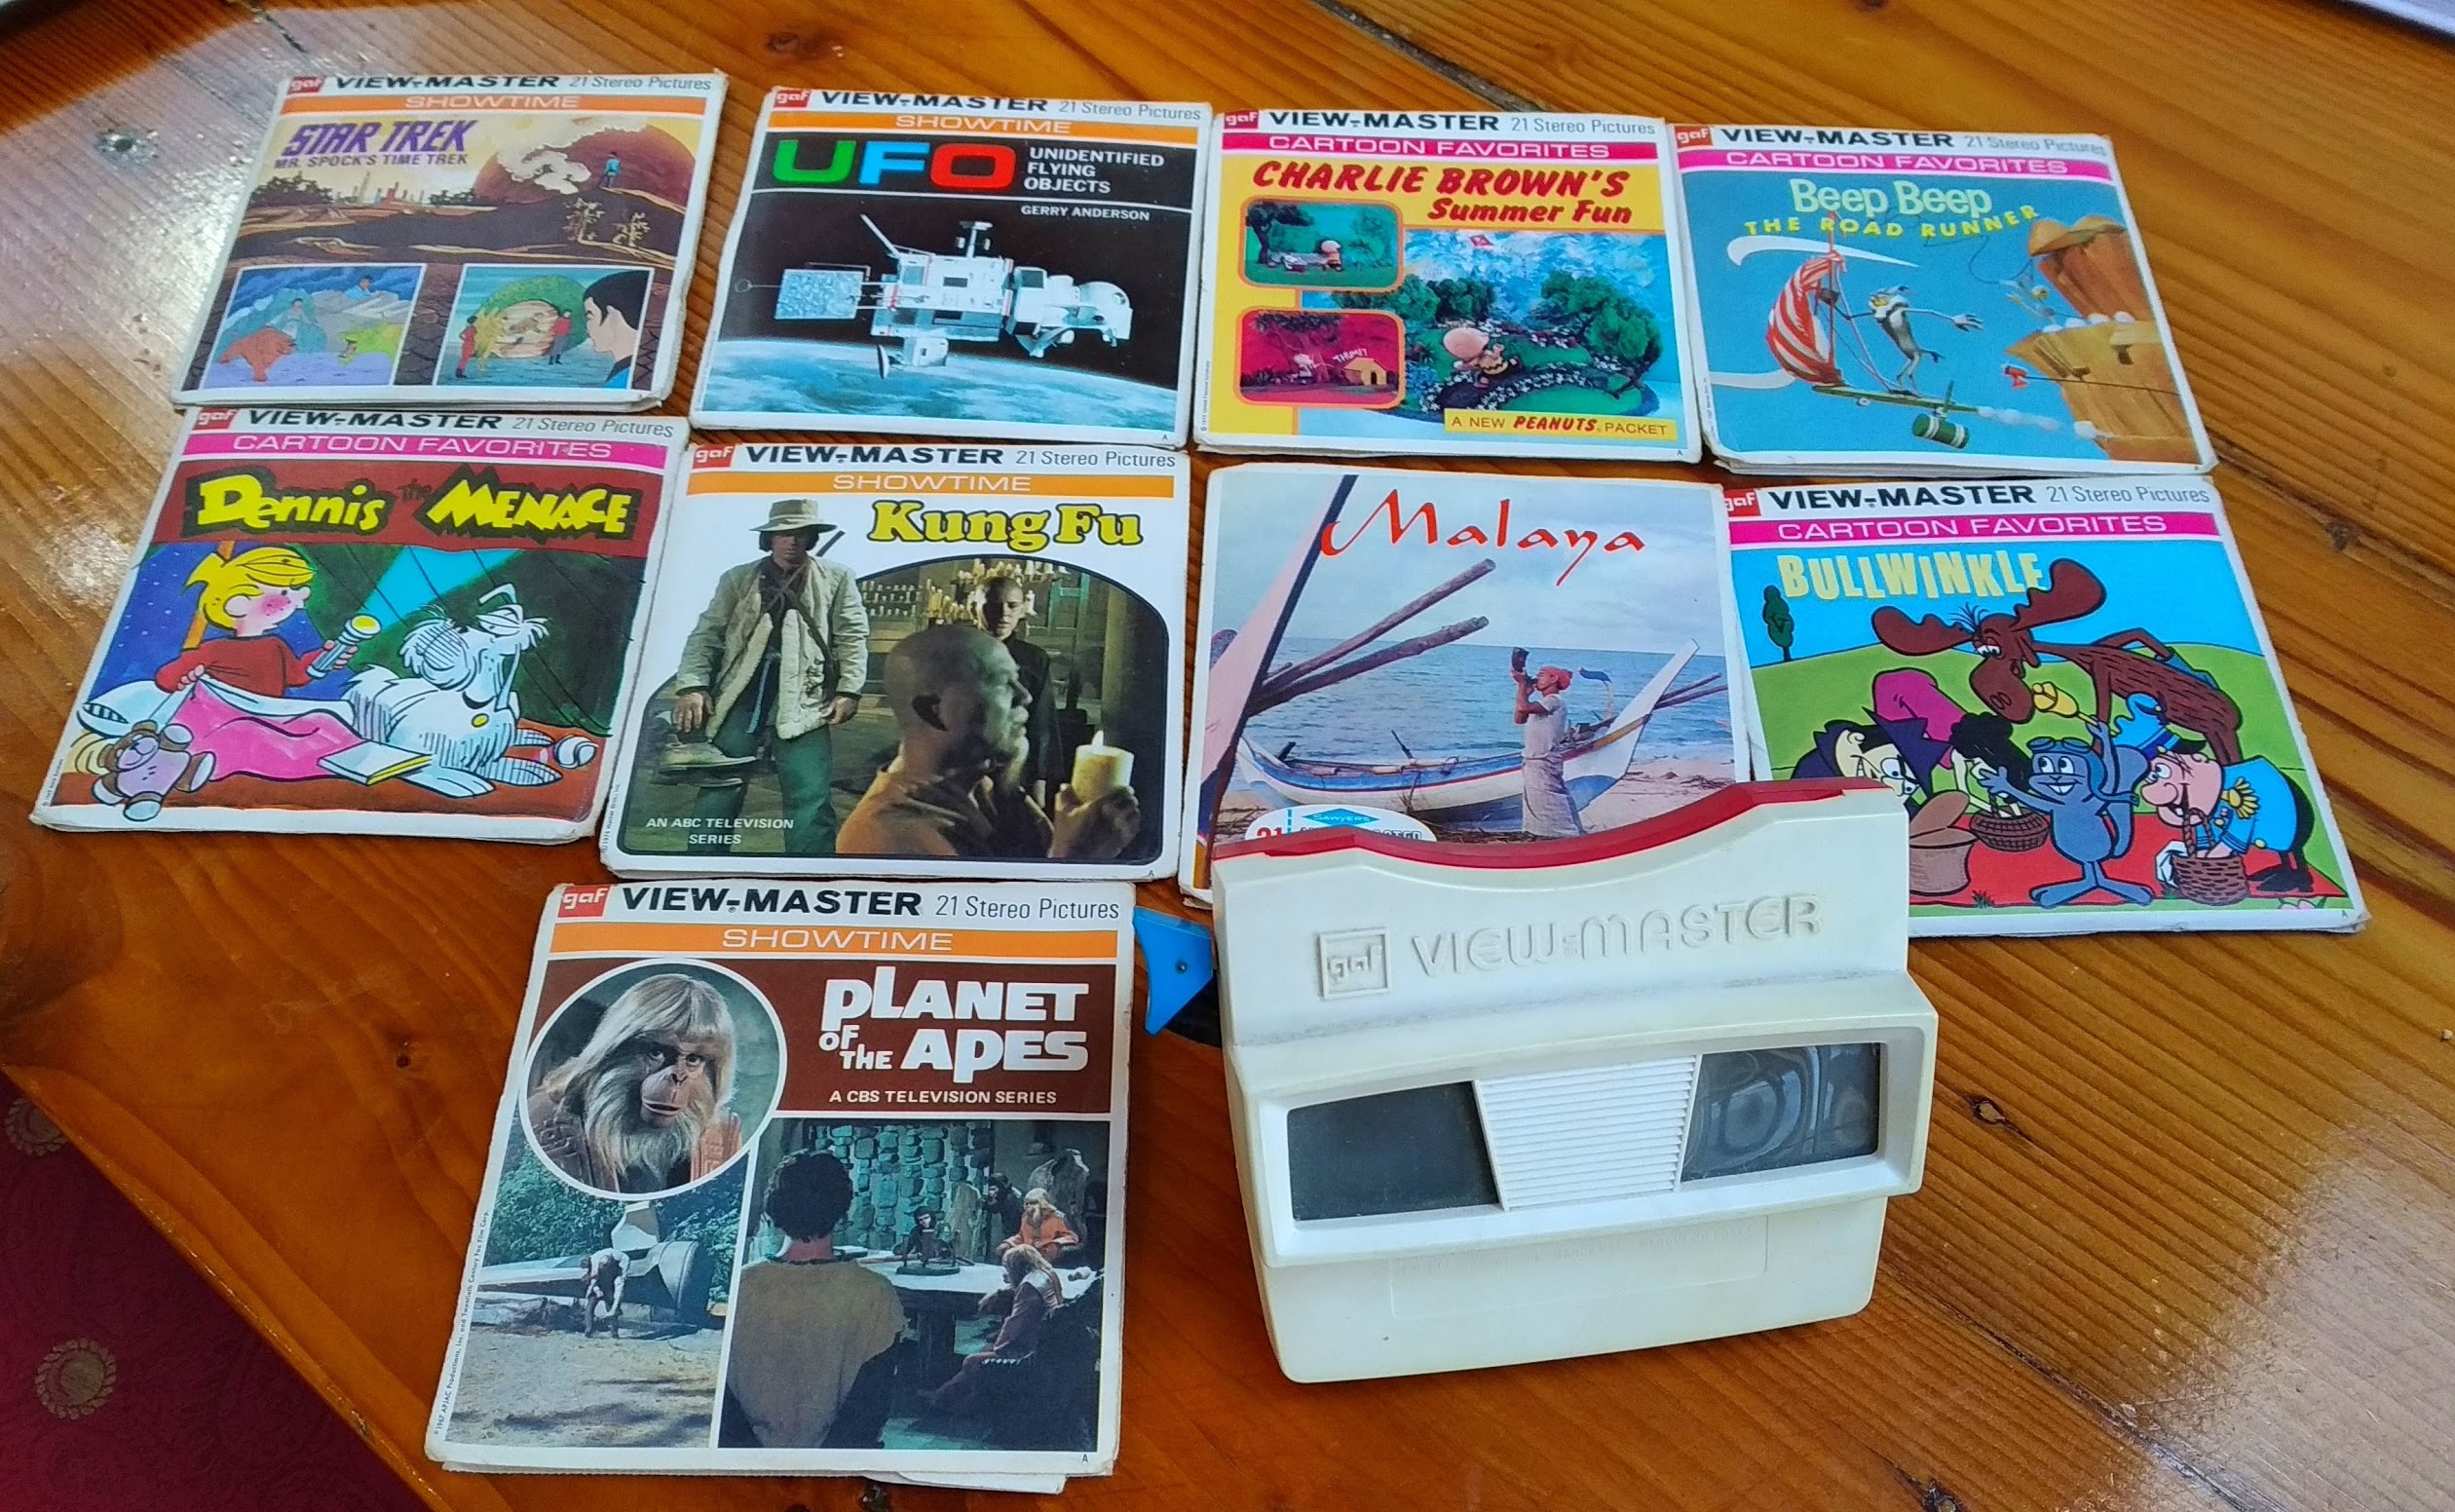 The View-Master slides of our youth were beautiful works of art